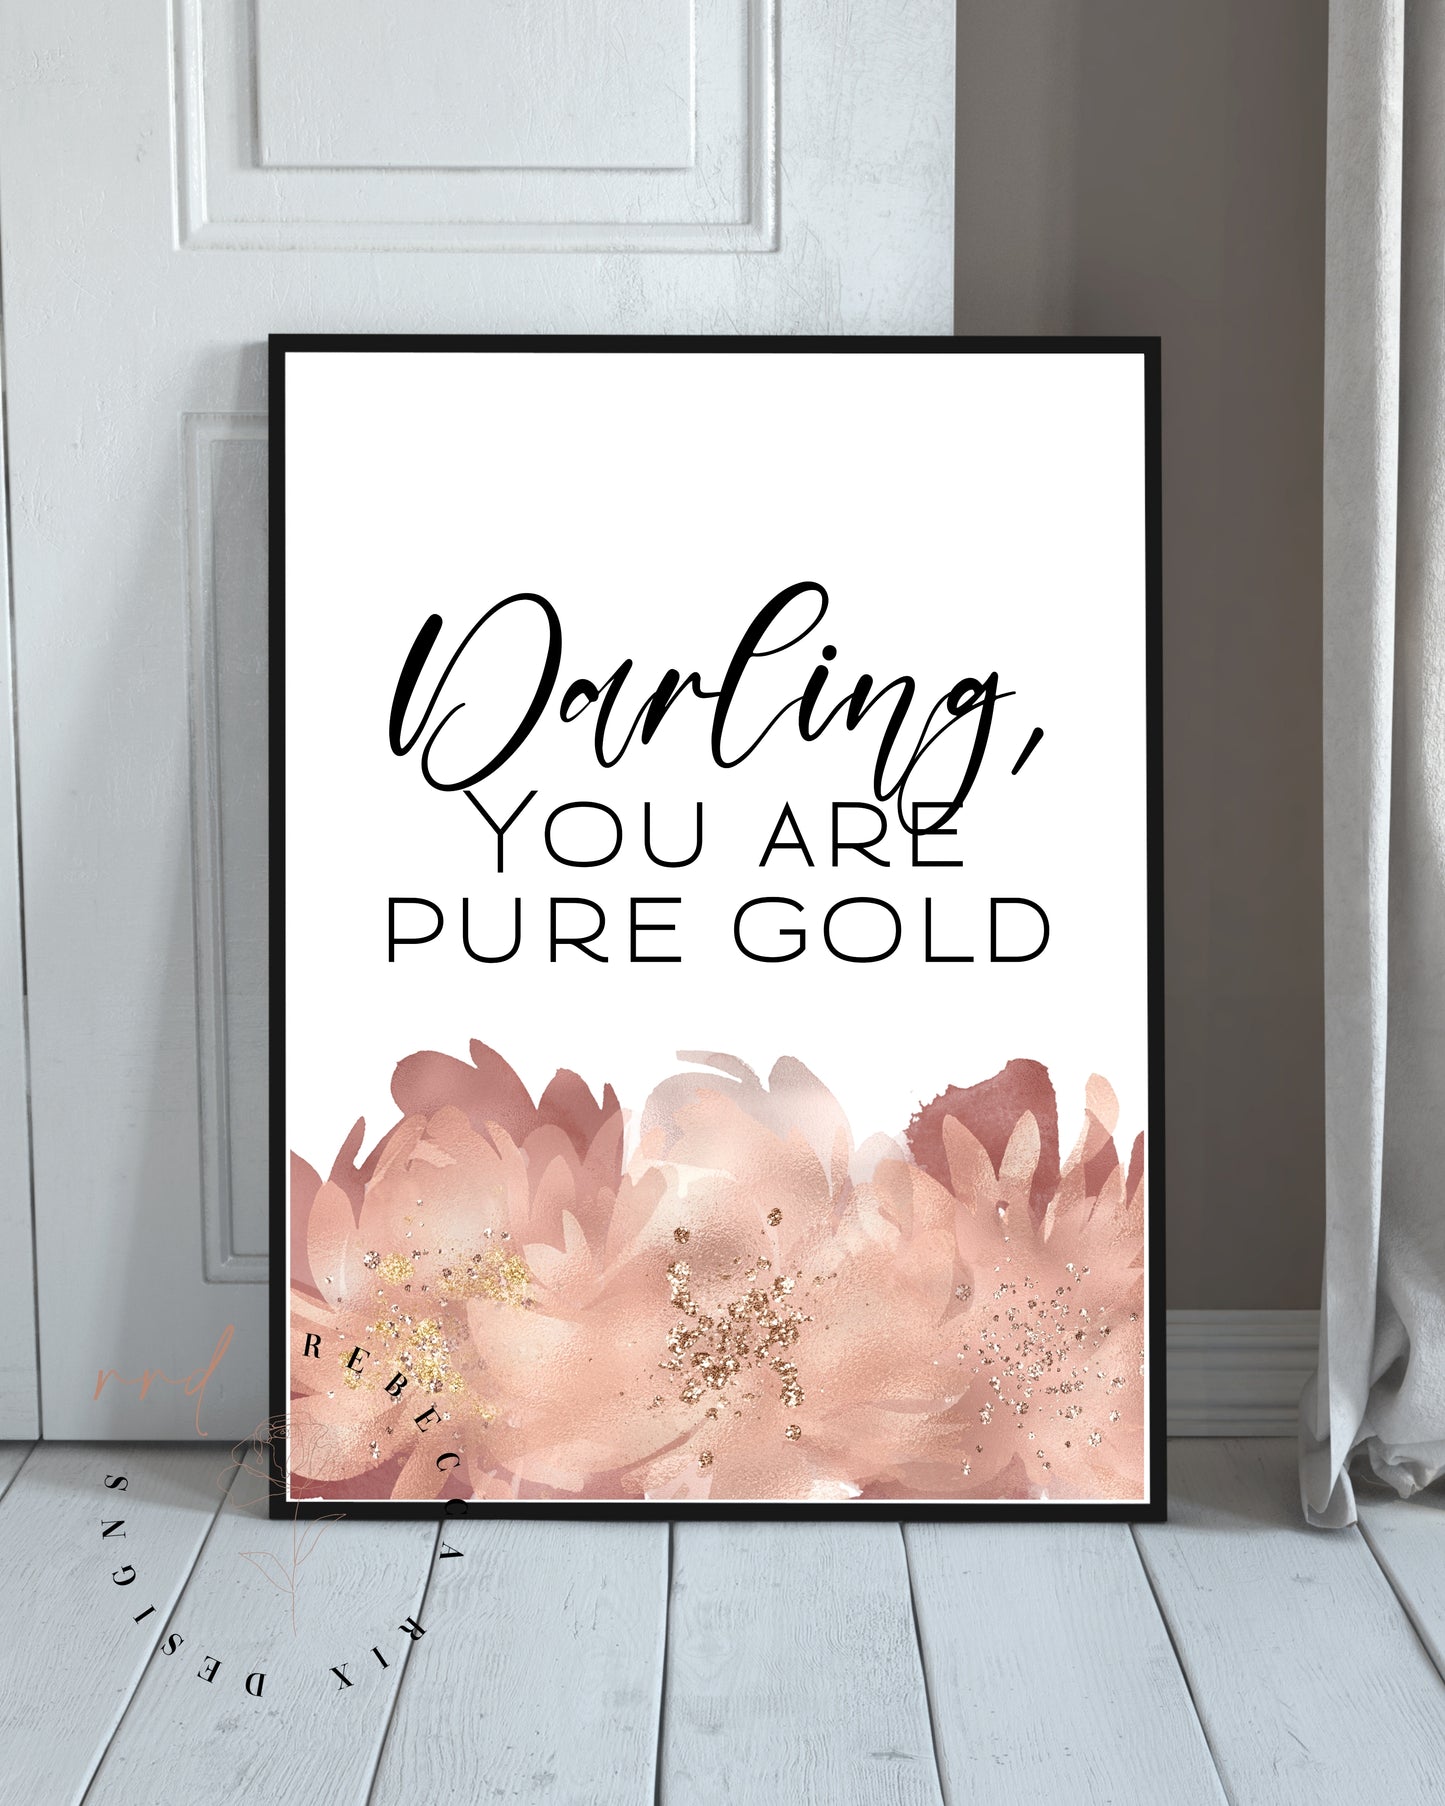 "Darling You Are Pure Gold" Motivational & Inspirational Quote For Girls, Printable Wall Art